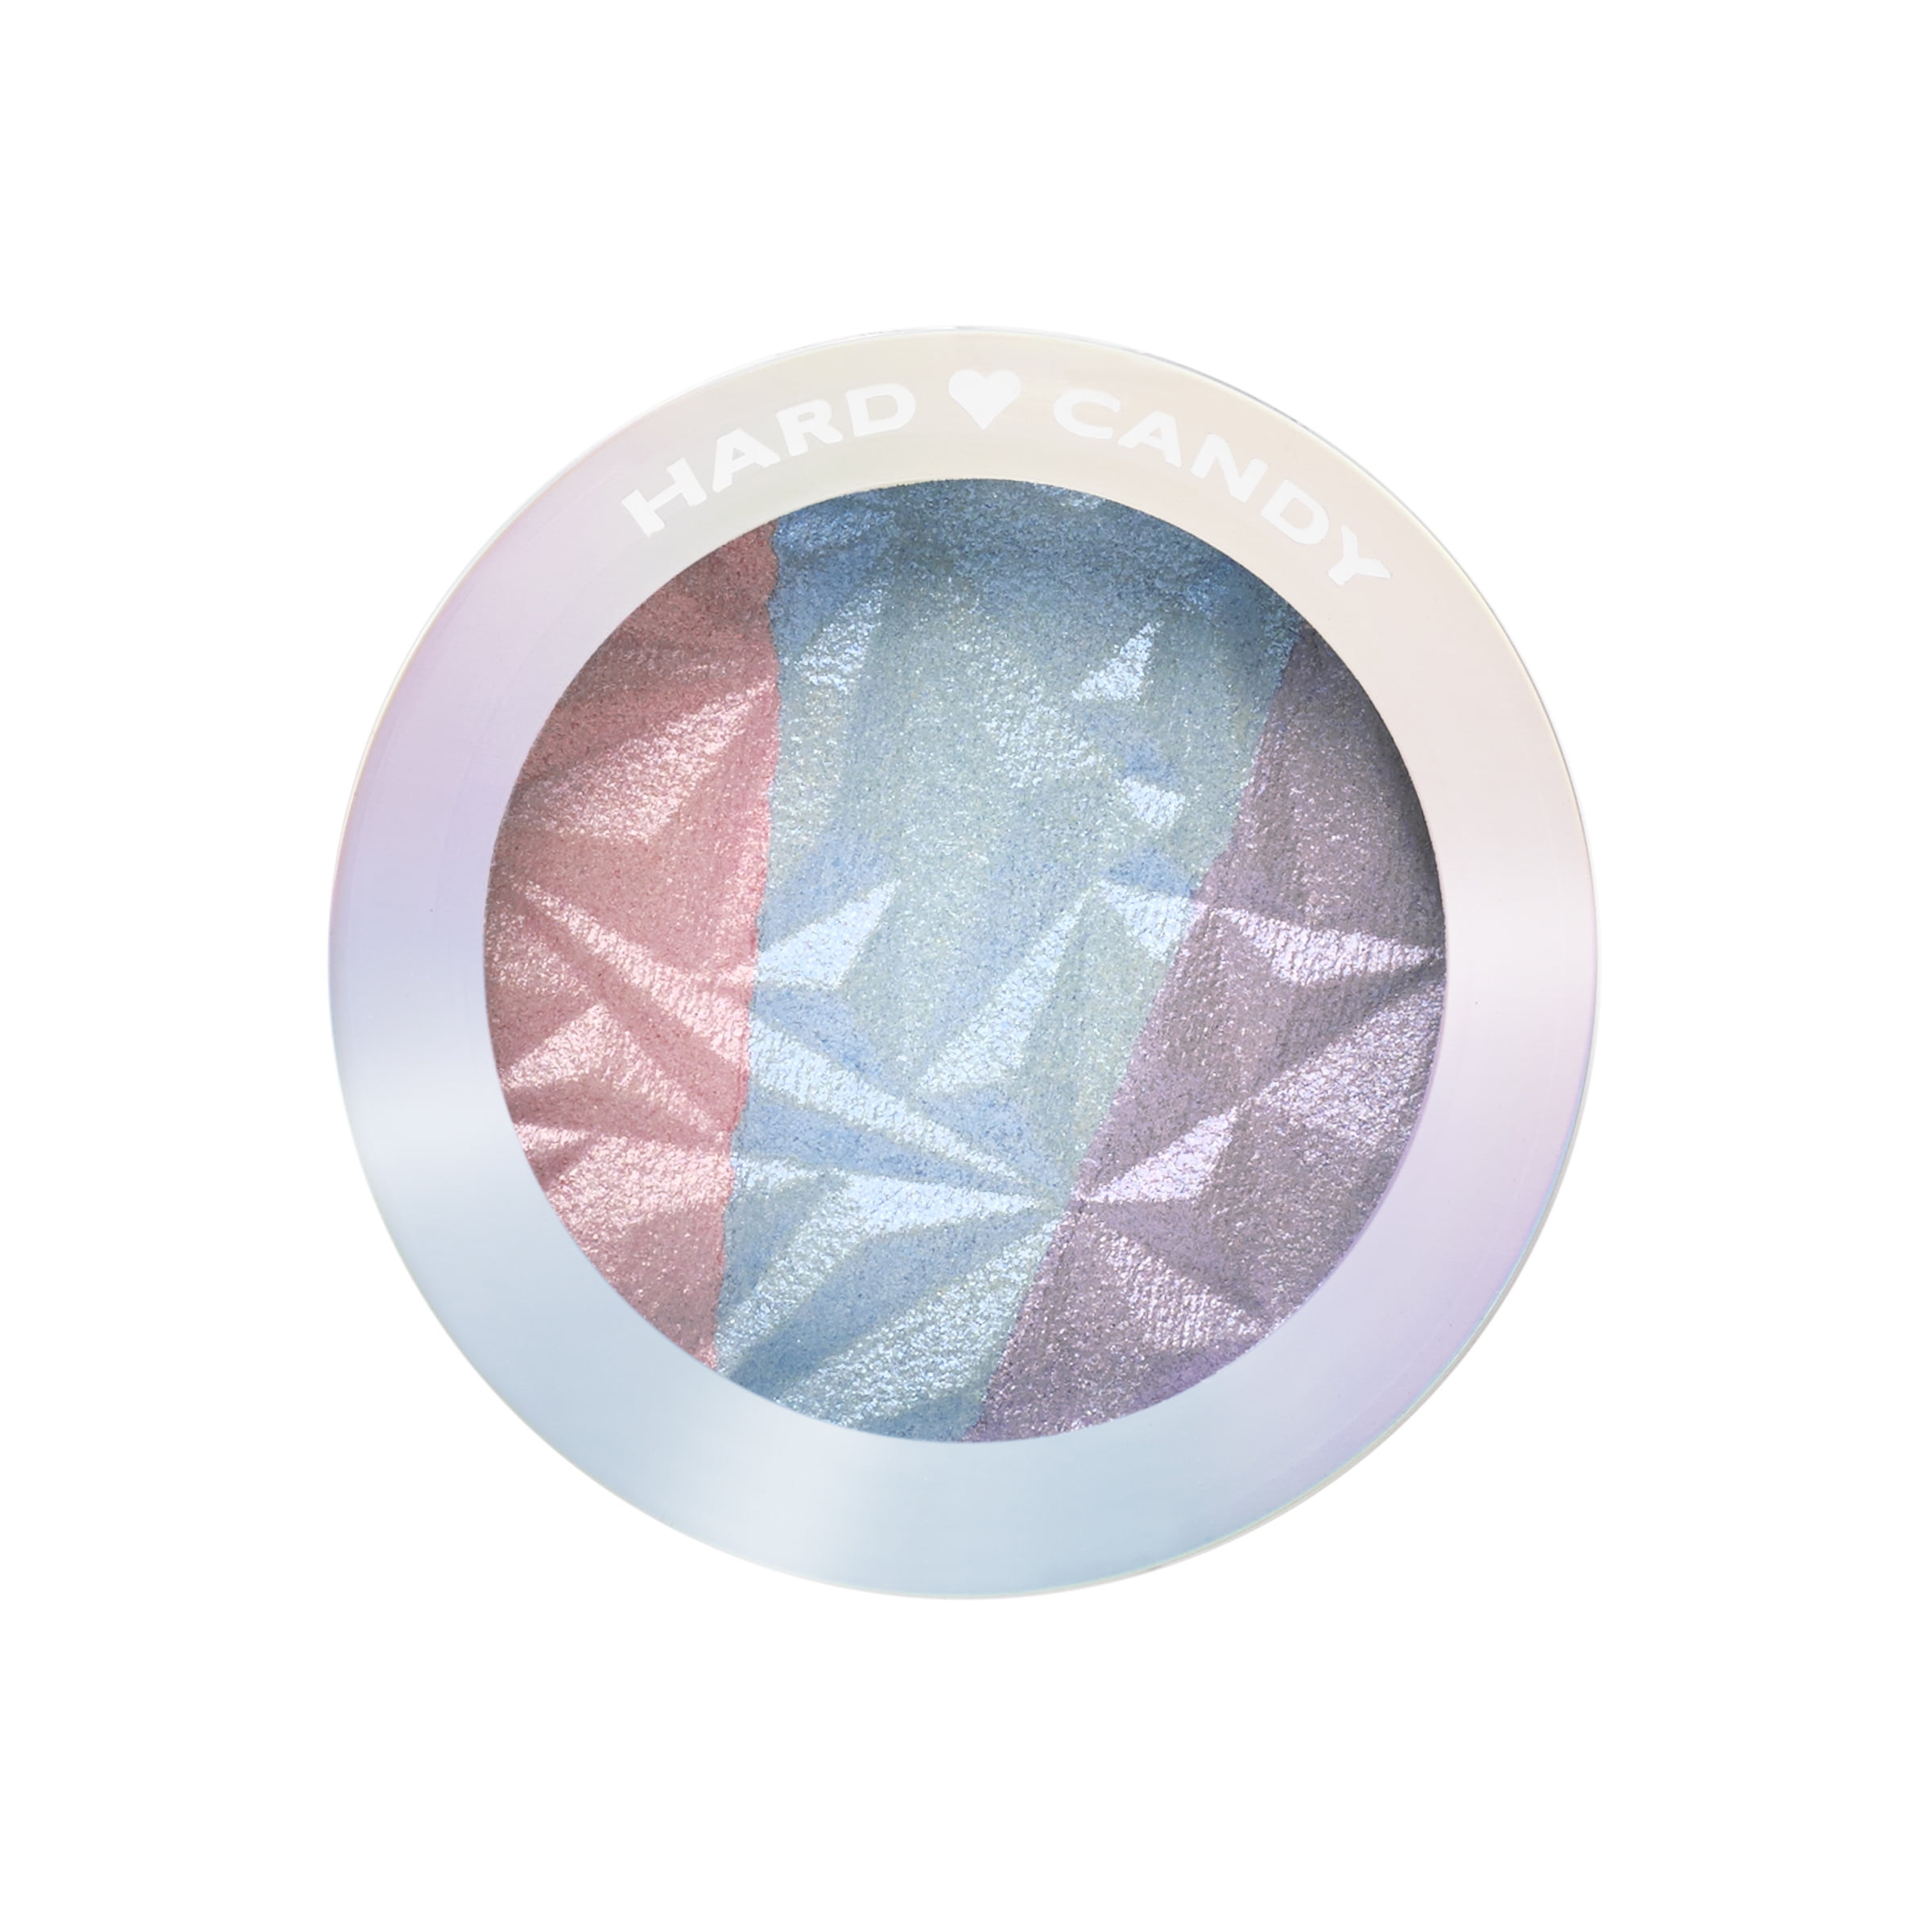 Hard Candy Just Glow Highlighter Powder, 1484 Fairy